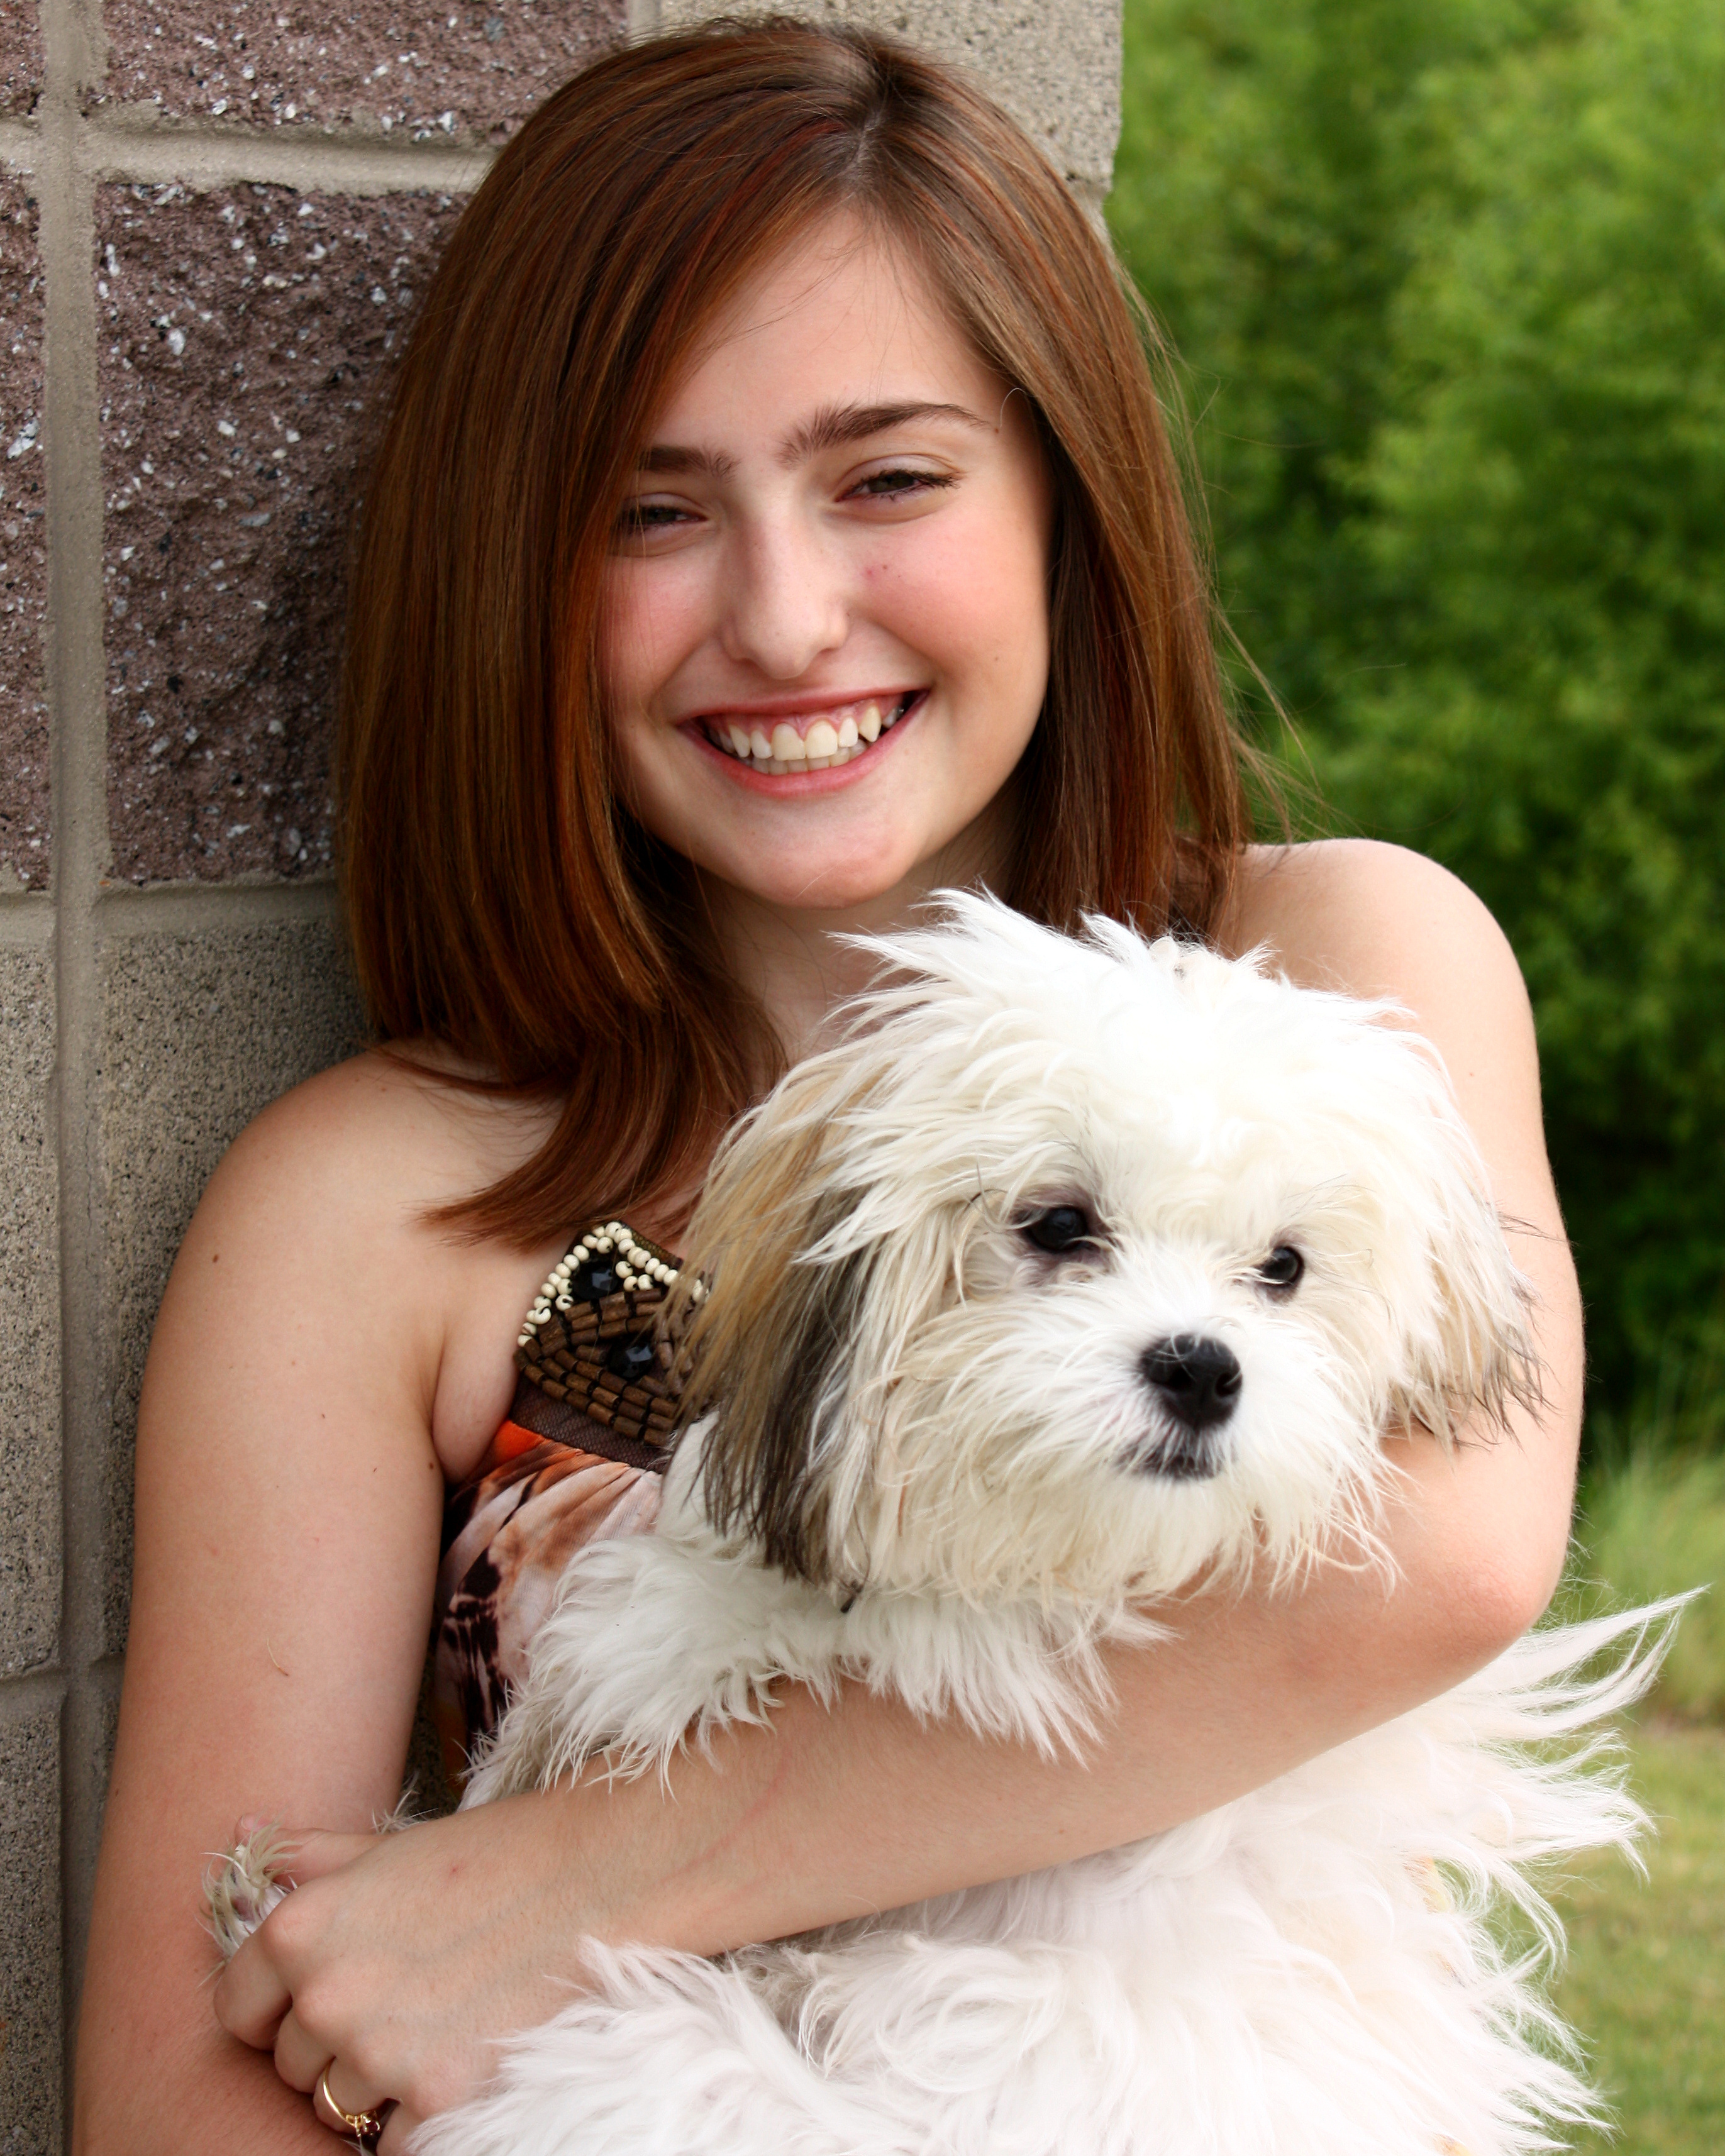 A young girl posing with a small dog photo